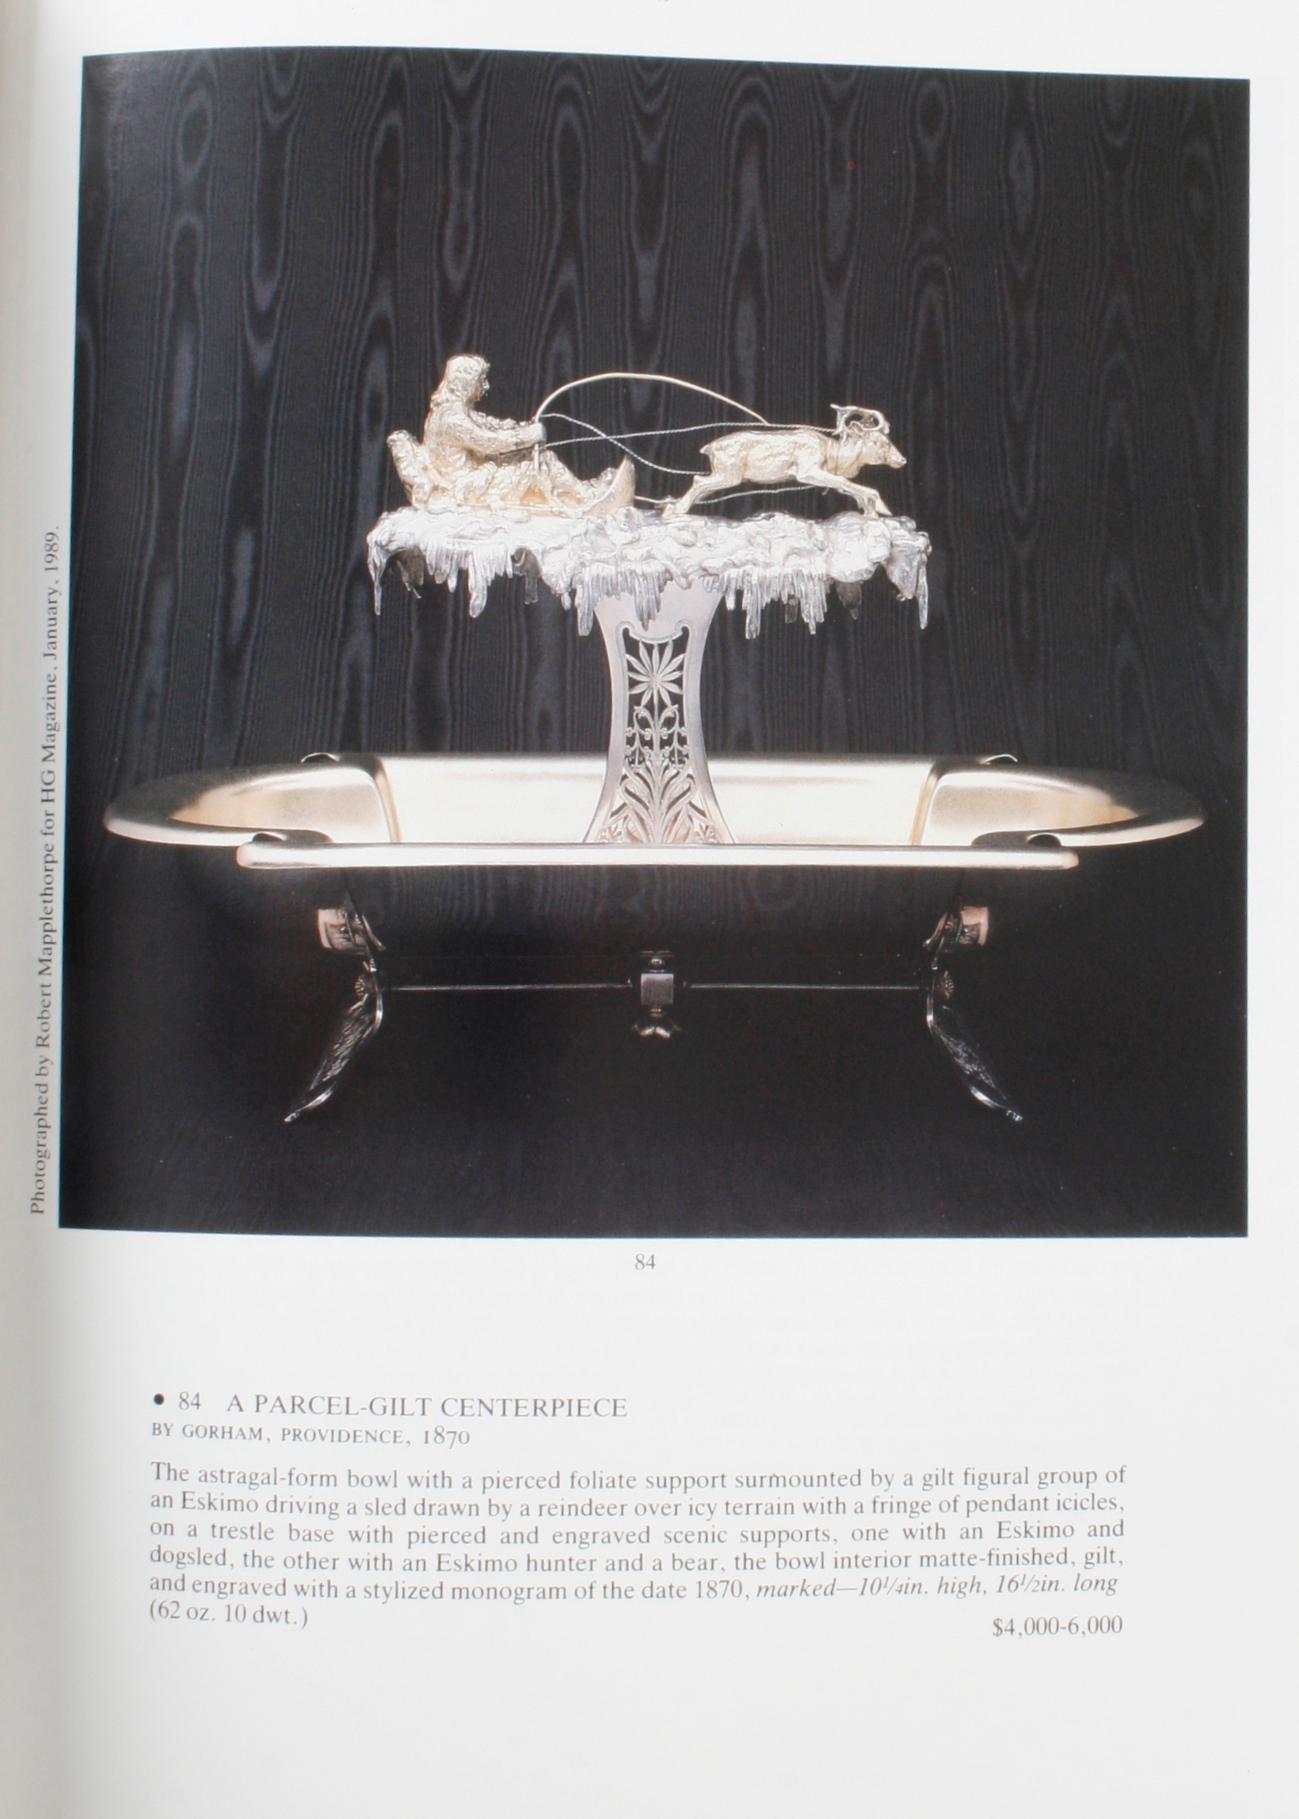 Paper Christie's, The Sam Wagstaff Collection of American Silver, January 1989